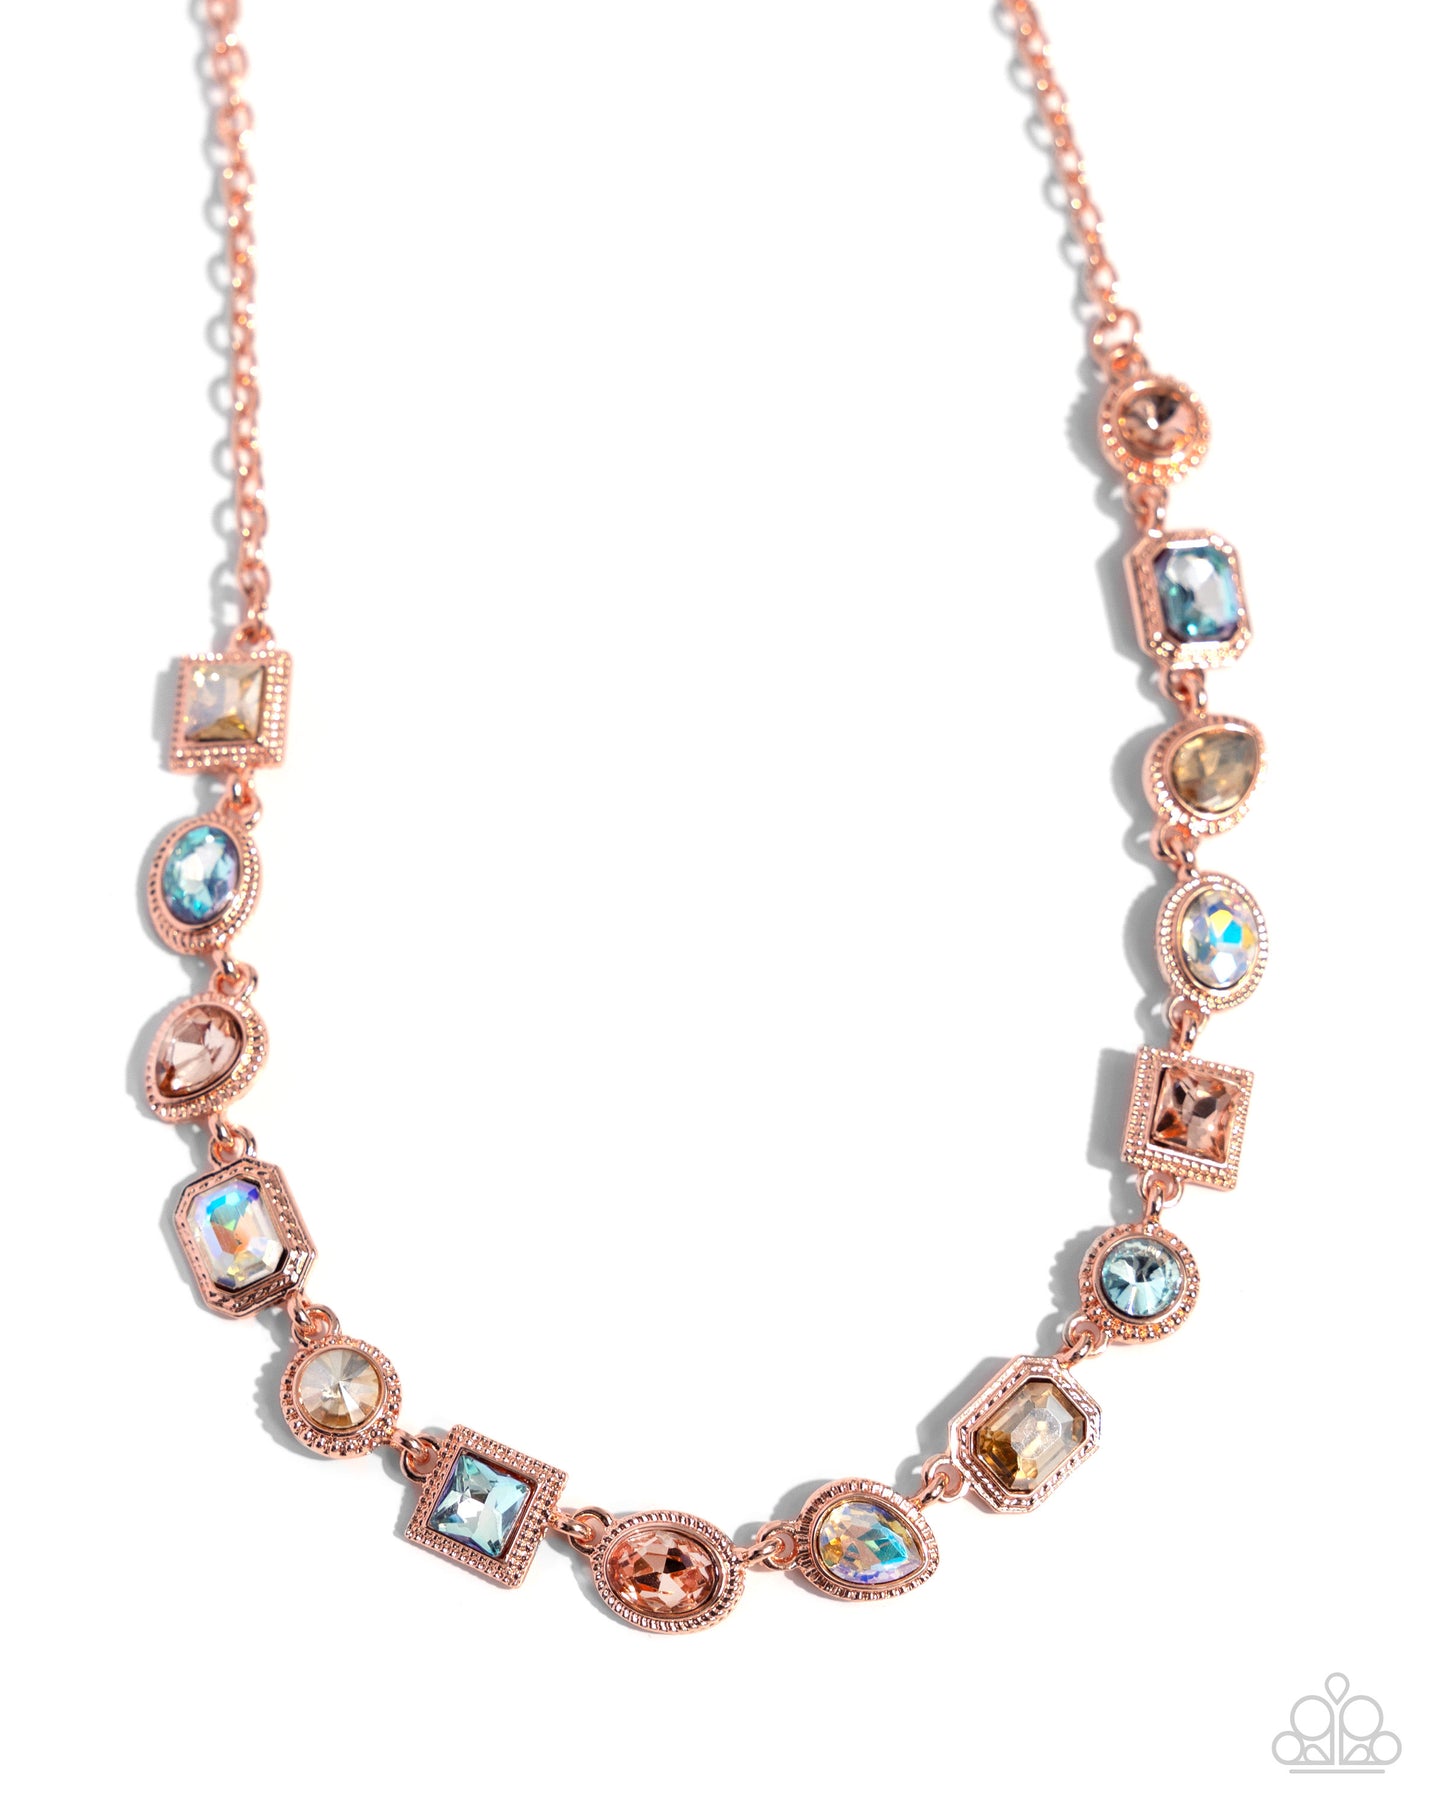 Gallery Glam - copper - Paparazzi necklace